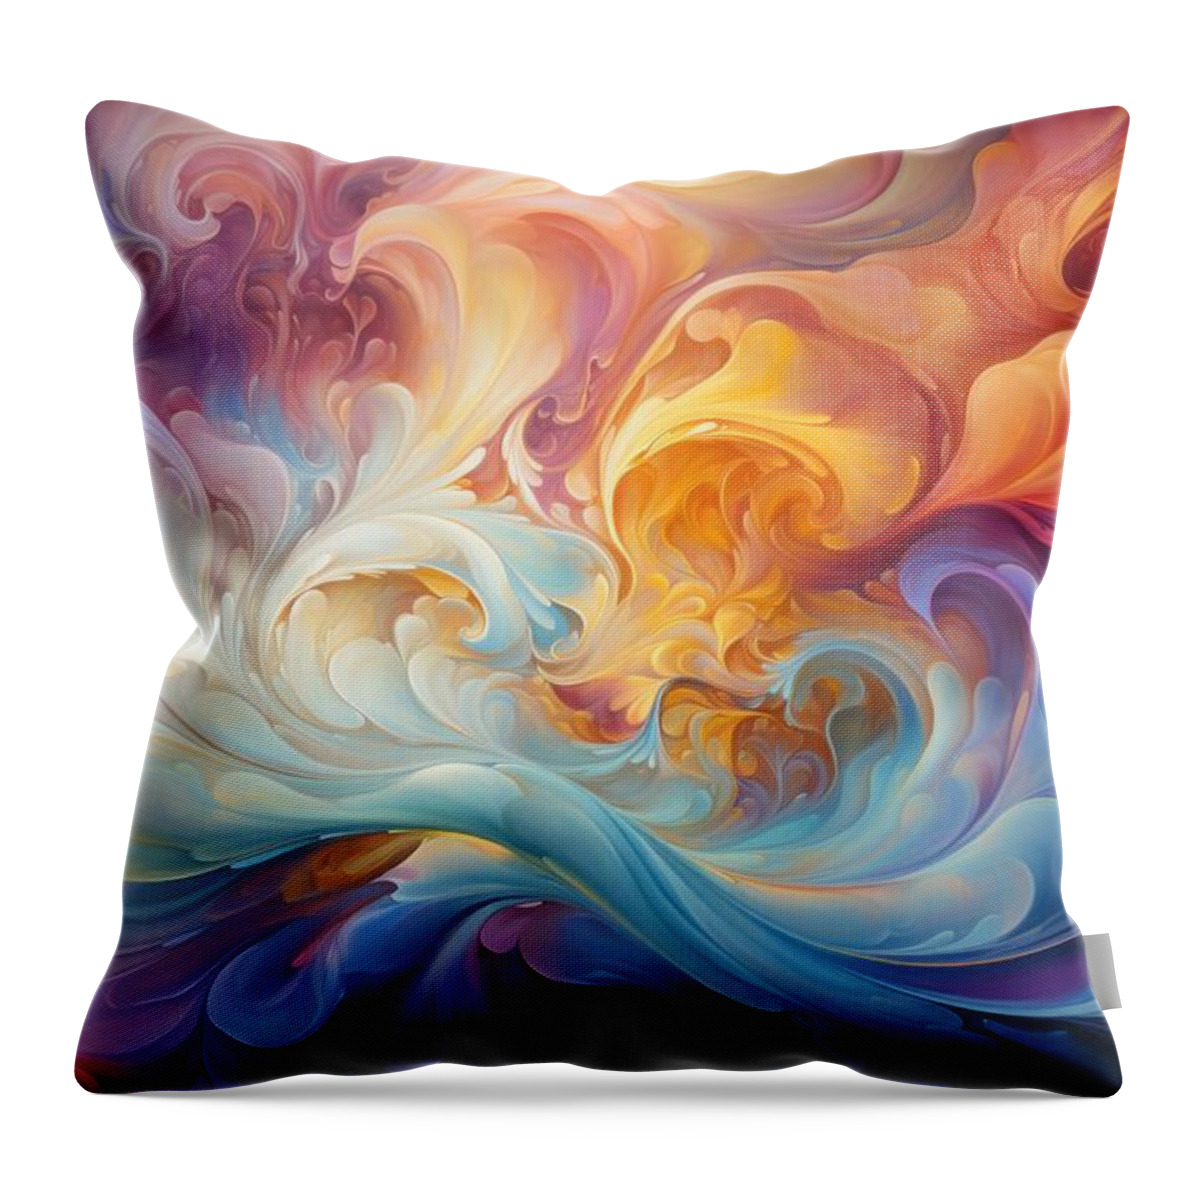 Abstract Throw Pillow featuring the painting Ethereal Fusion by Land of Dreams